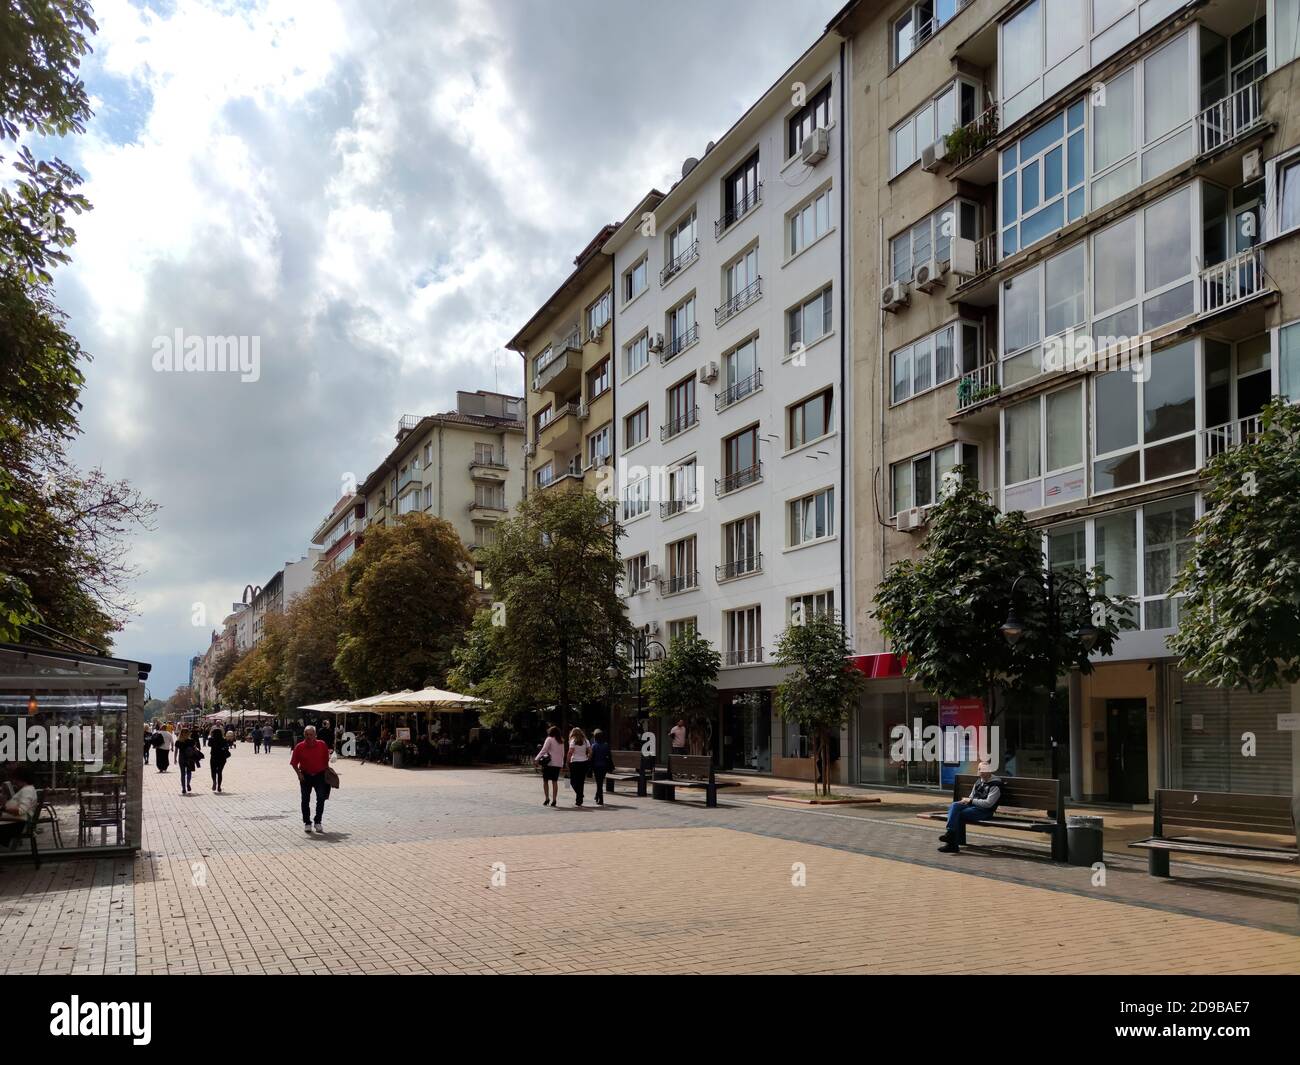 Pedestrian Boulevard High Resolution Stock Photography and Images - Alamy